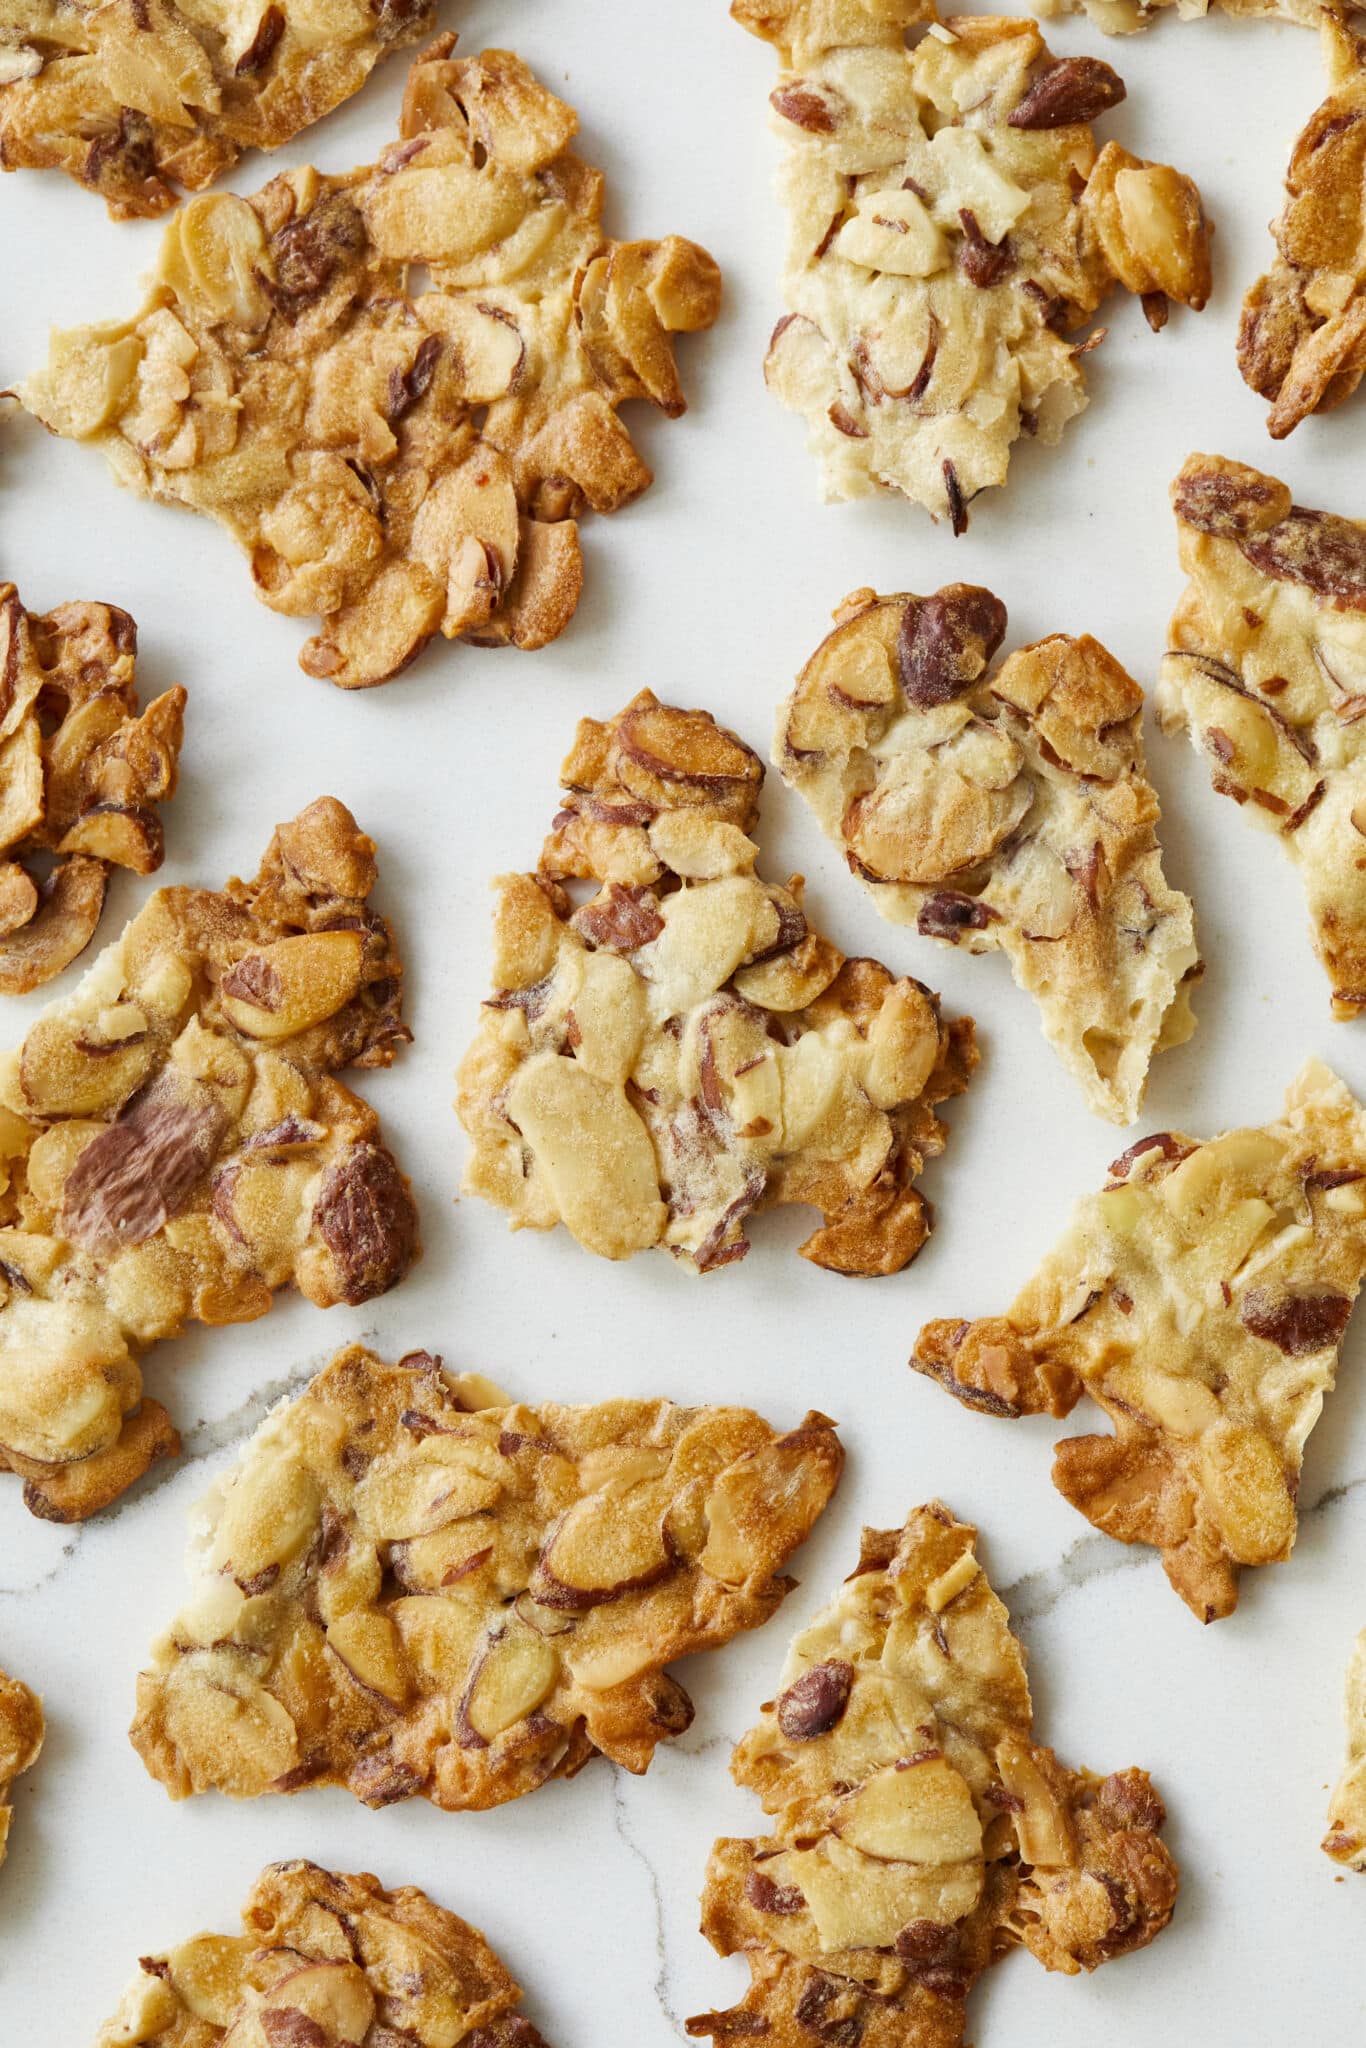 An overhead shot at satisfying Almond Crisps shows clusters of thin slivered almonds that are baked until crunchy and caramelized golden brown. 